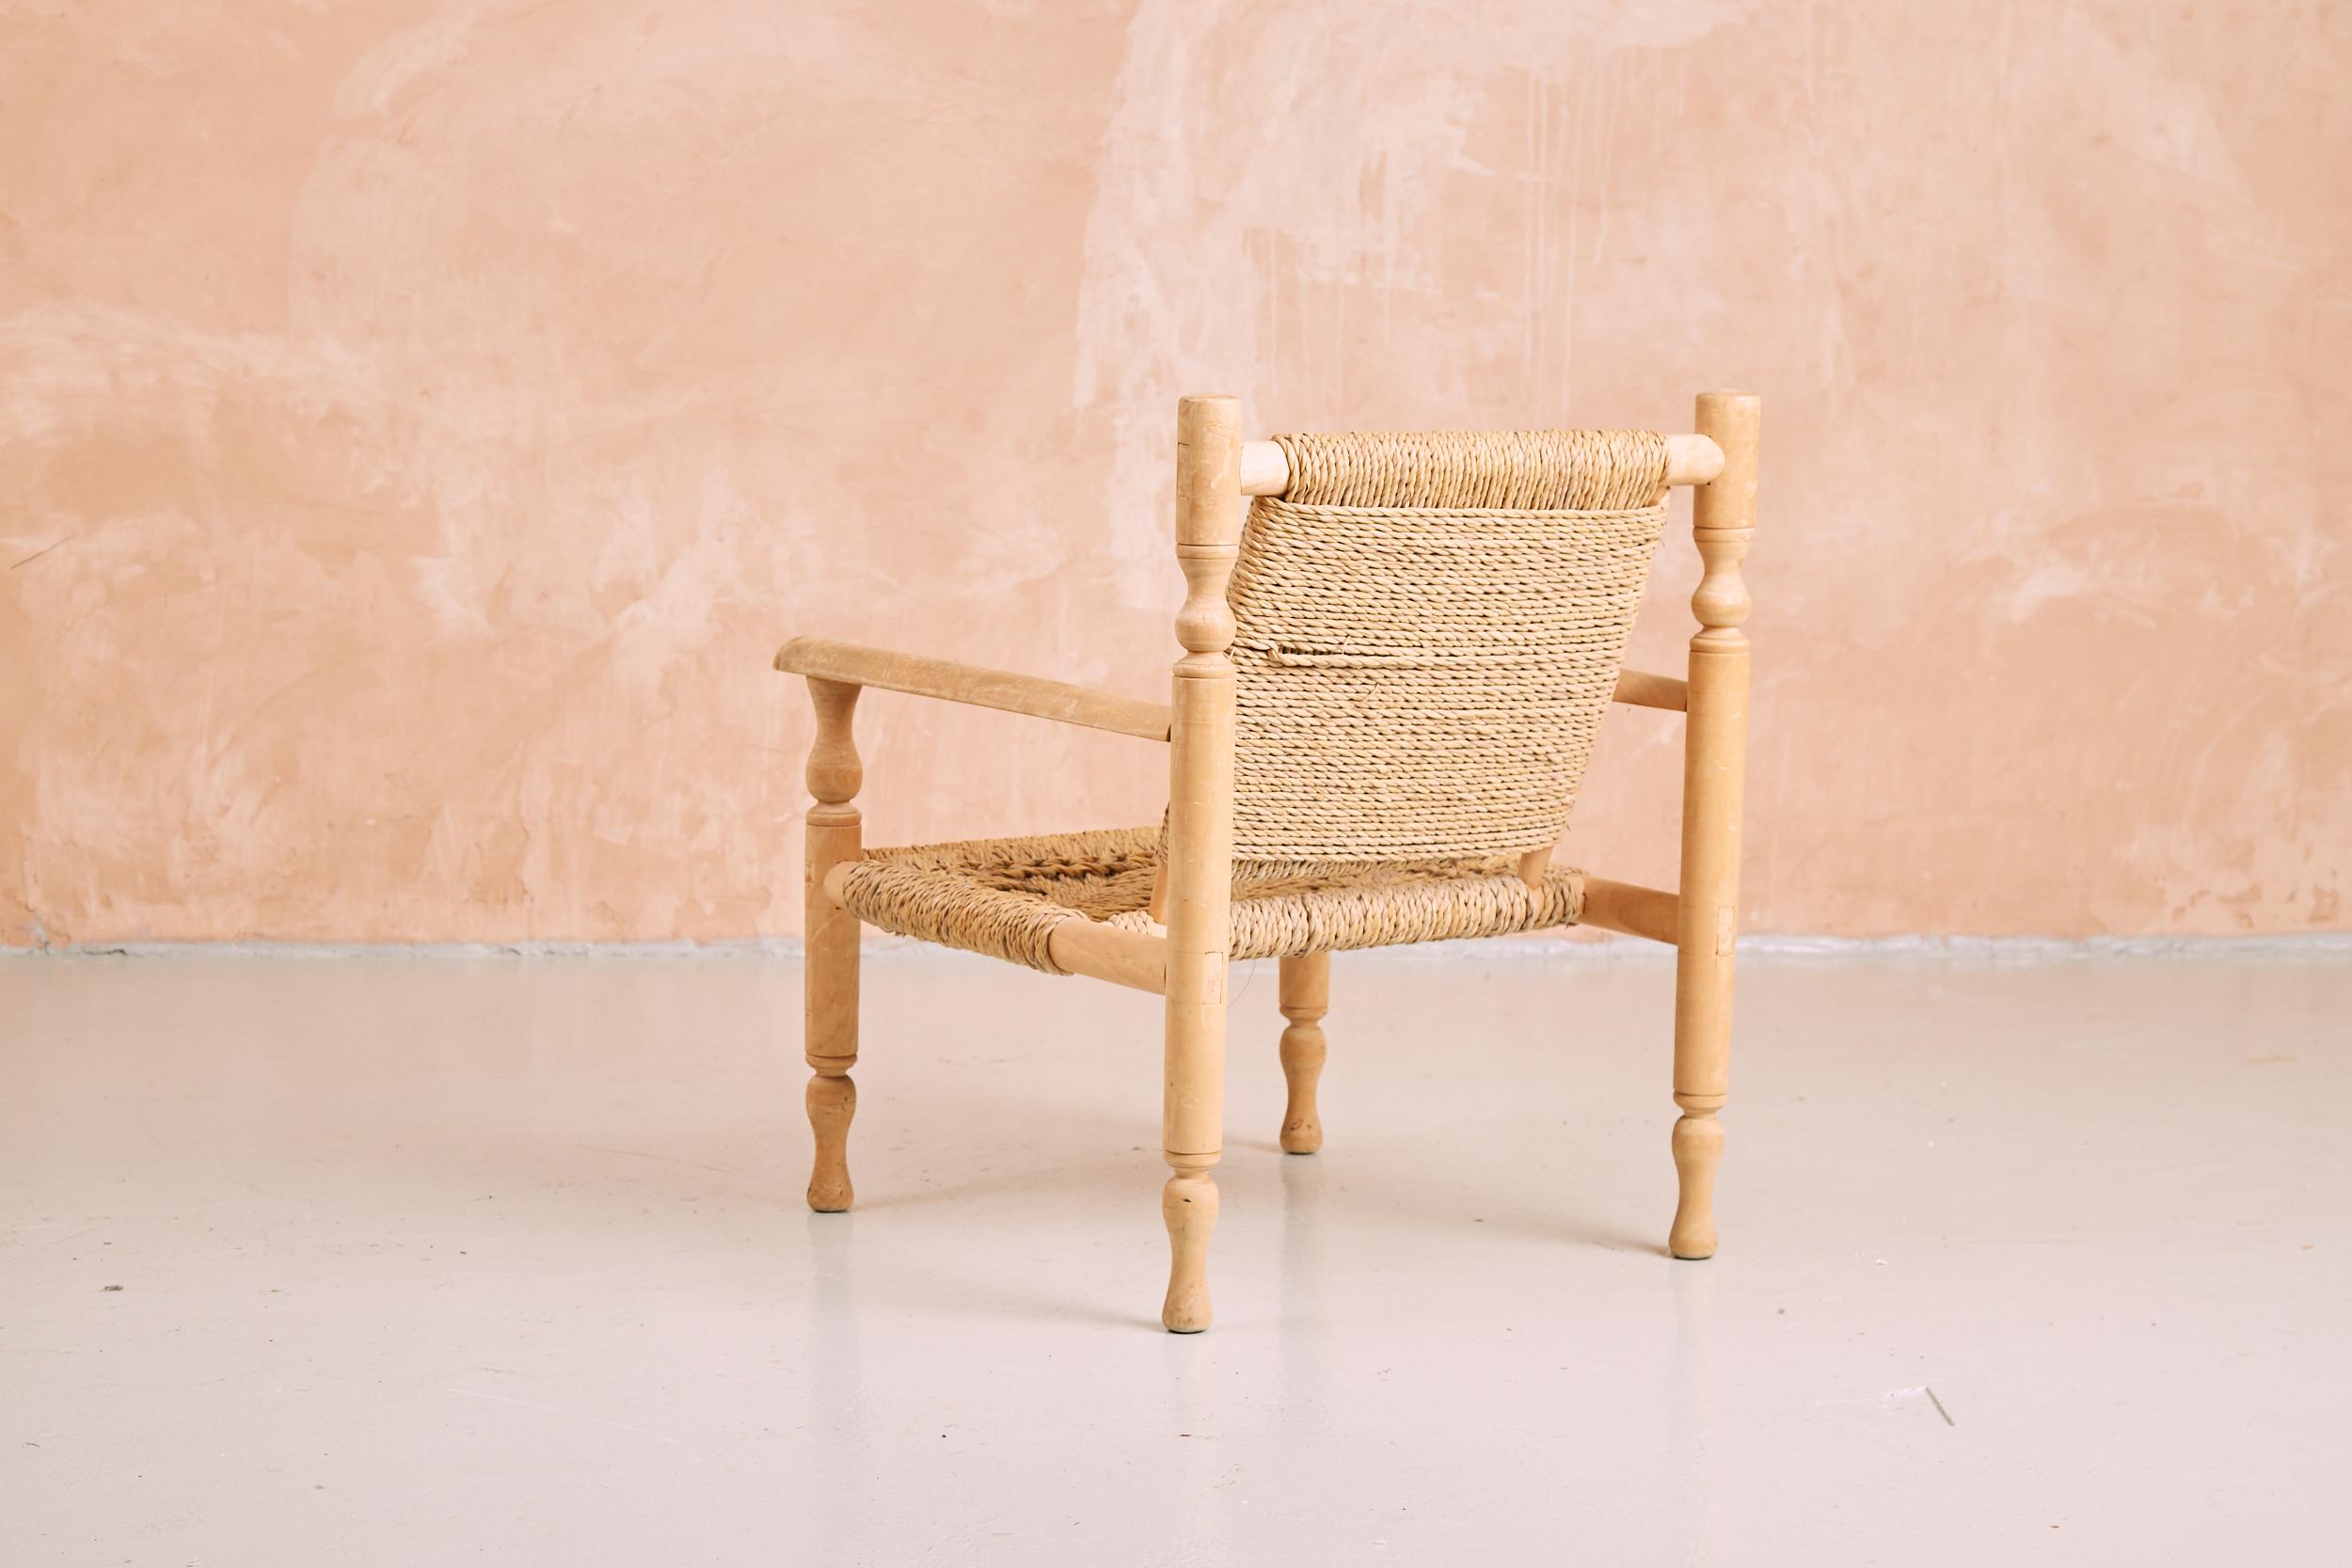 A rare hand crafted Audoux Minet armchair in pine and wicker. A vintage French classic, the chair was designed by Adrien Audoux and Frida Minet in the mid century. Extremely comfortable and compliment a touch of rustic in a contemporary or mid